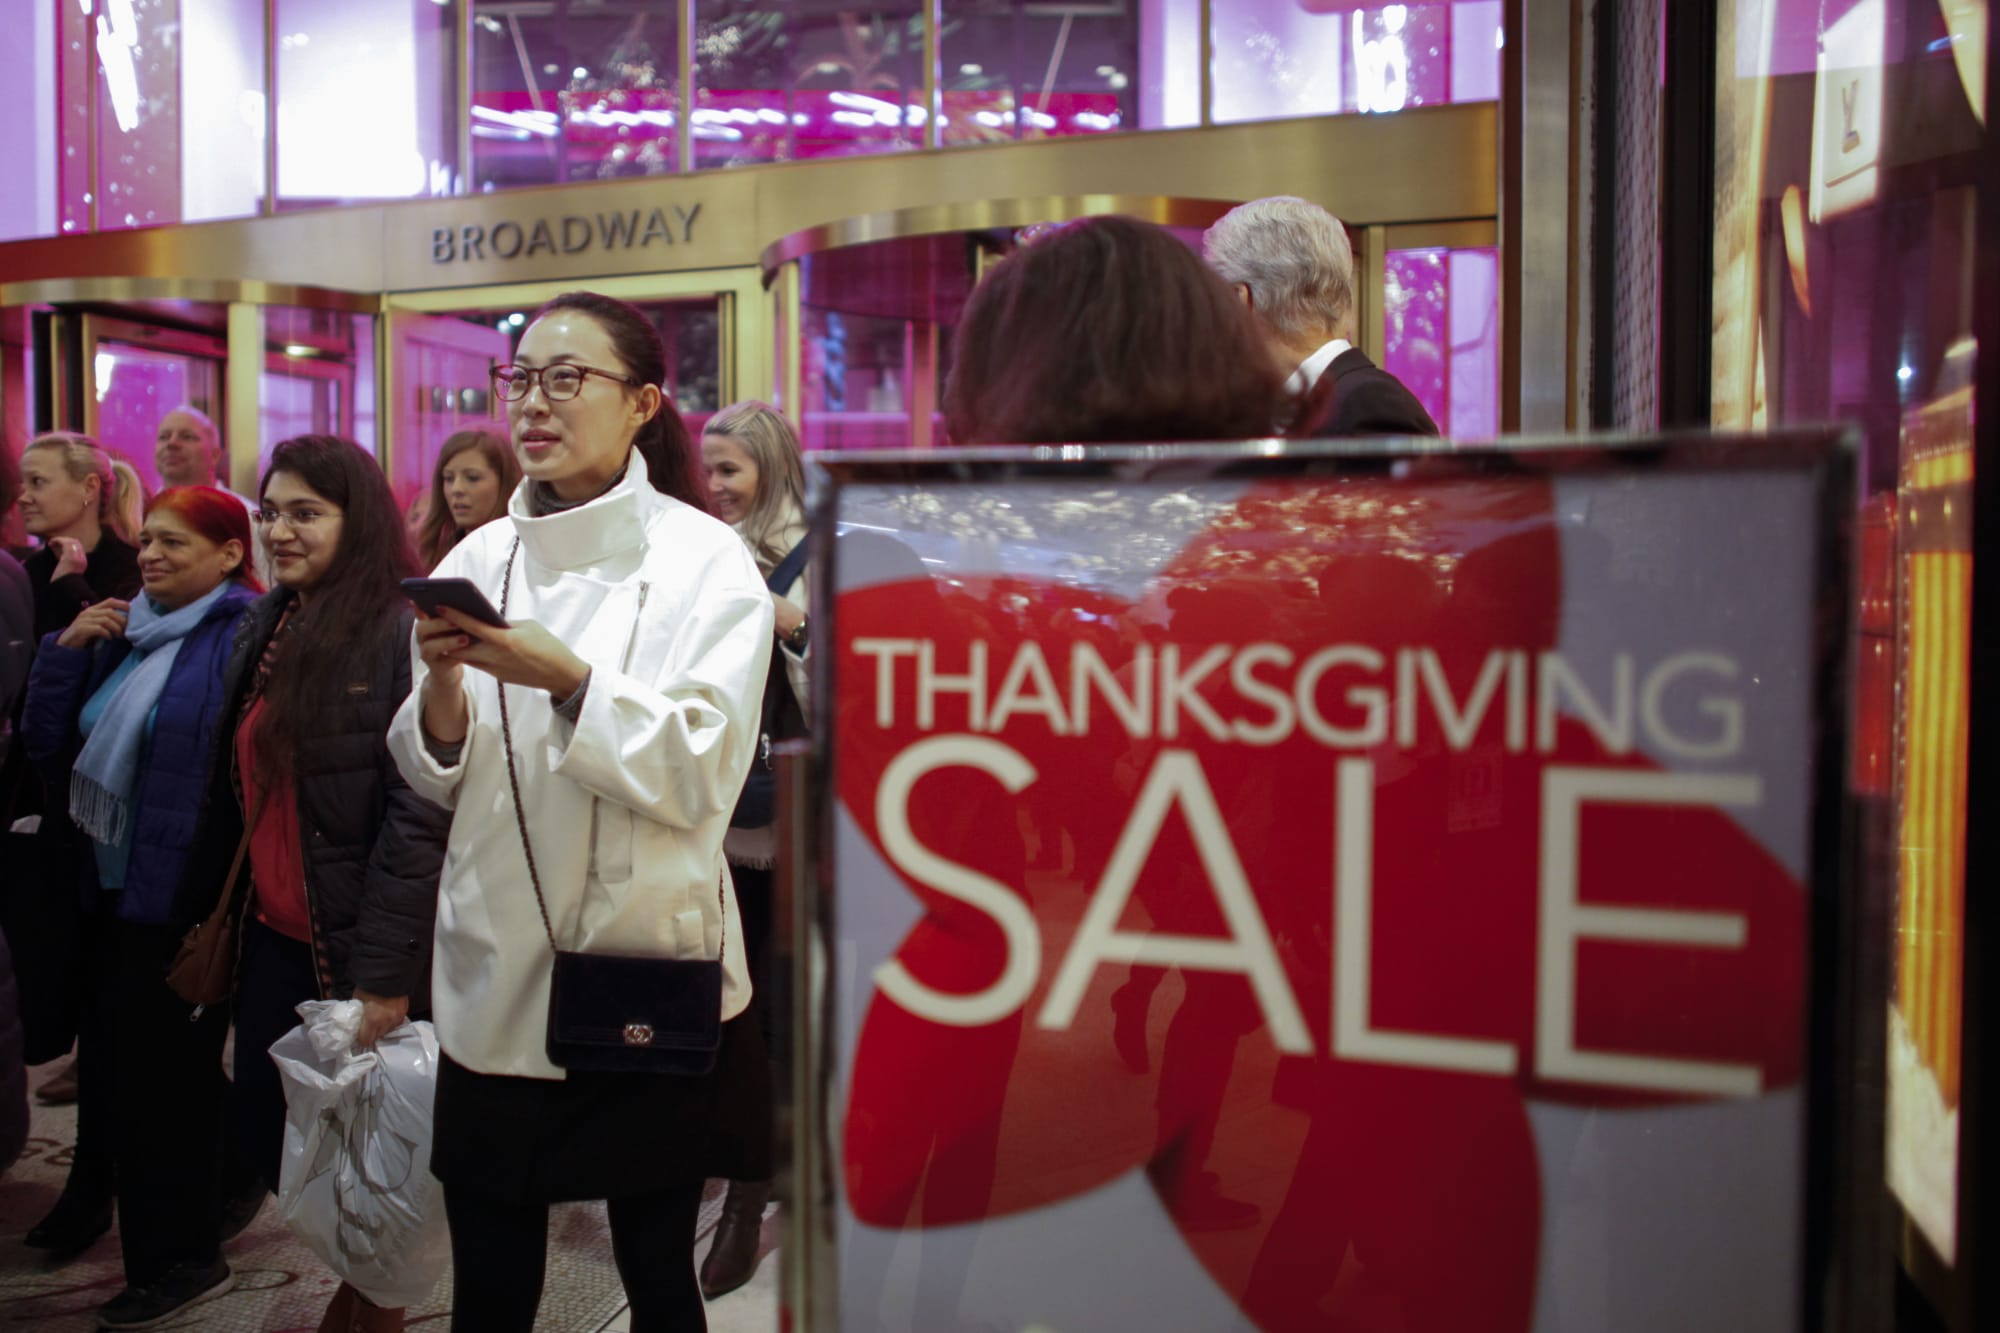 Black Friday 2016: What are Macy's hours? - What Stores Are Open On Black Friday 2016